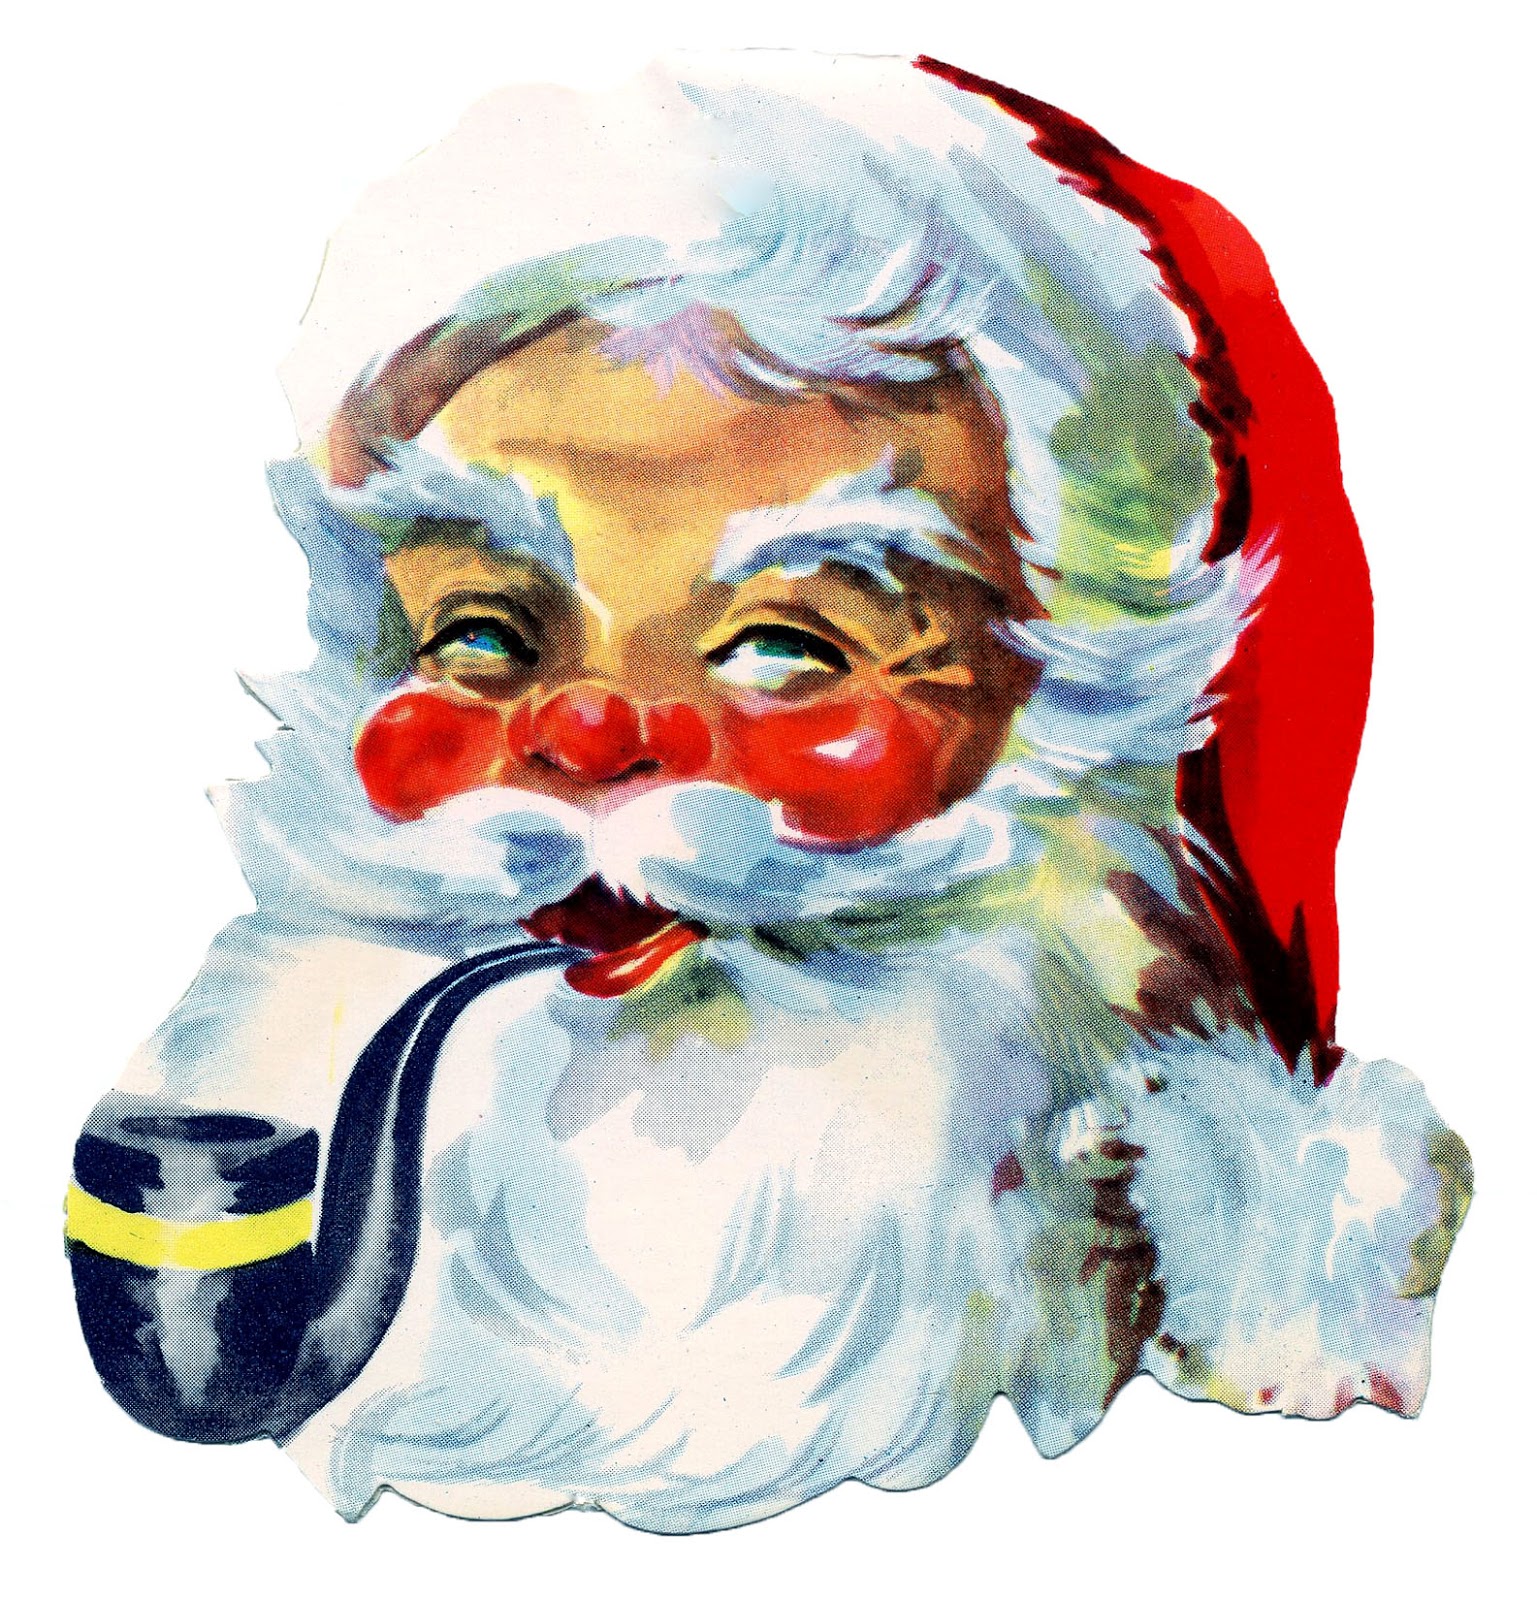 Graphic   Gorgeous Rosy Cheeked Santa With Pipe   The Graphics Fairy